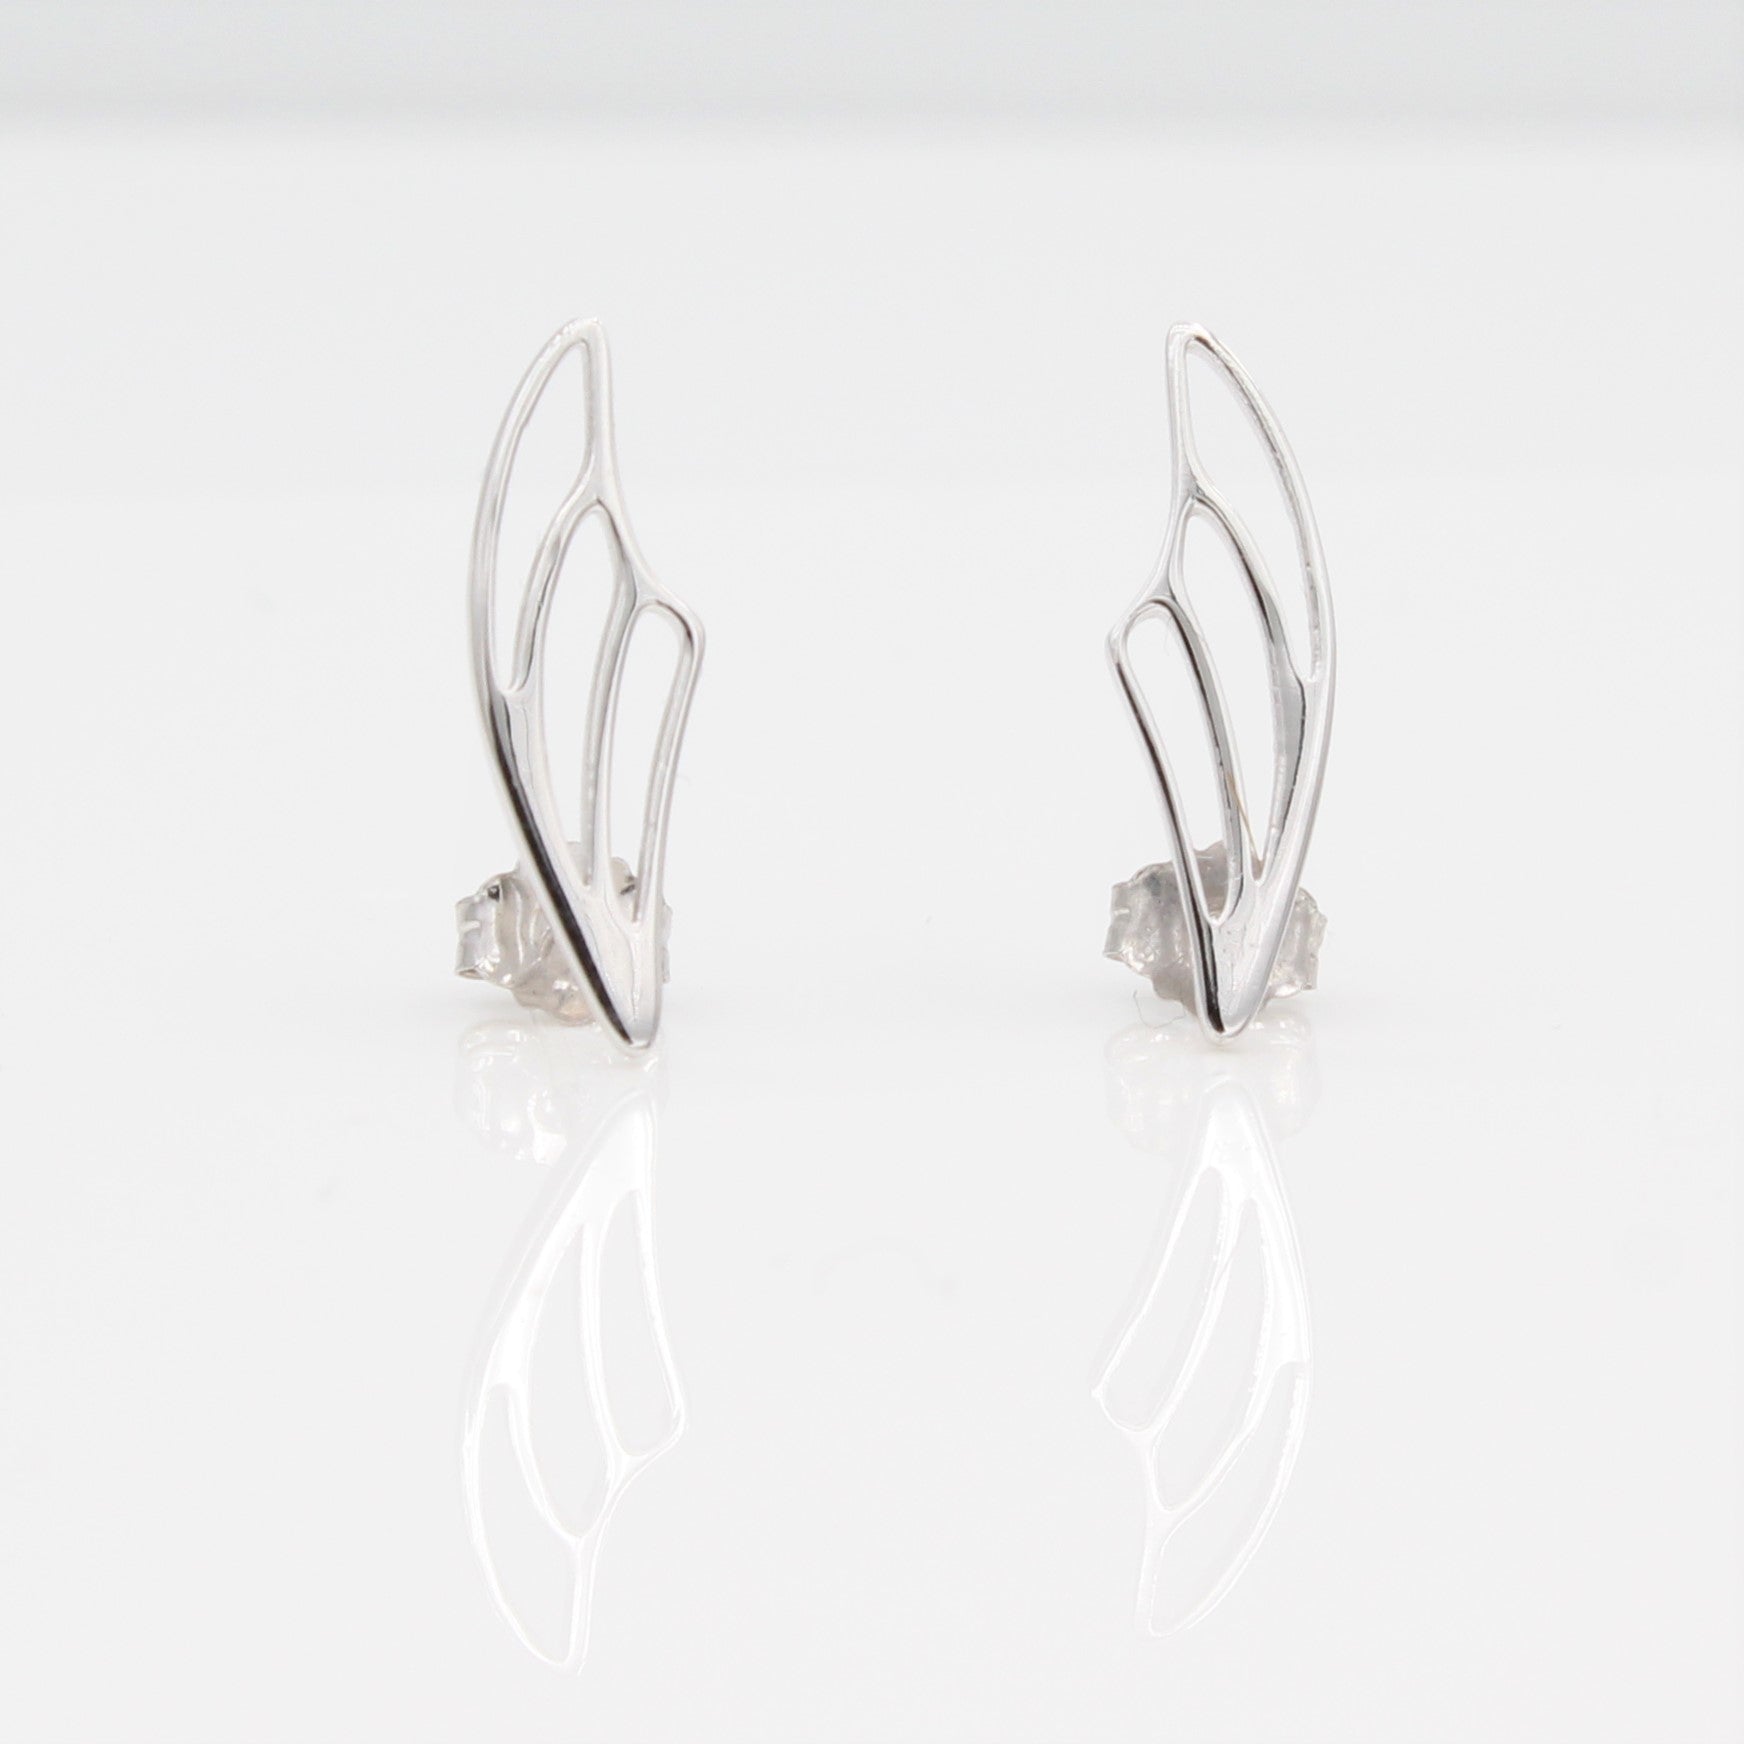 14k White Gold Fairy Wing Ear Climbers Earrings with Posts, front view.